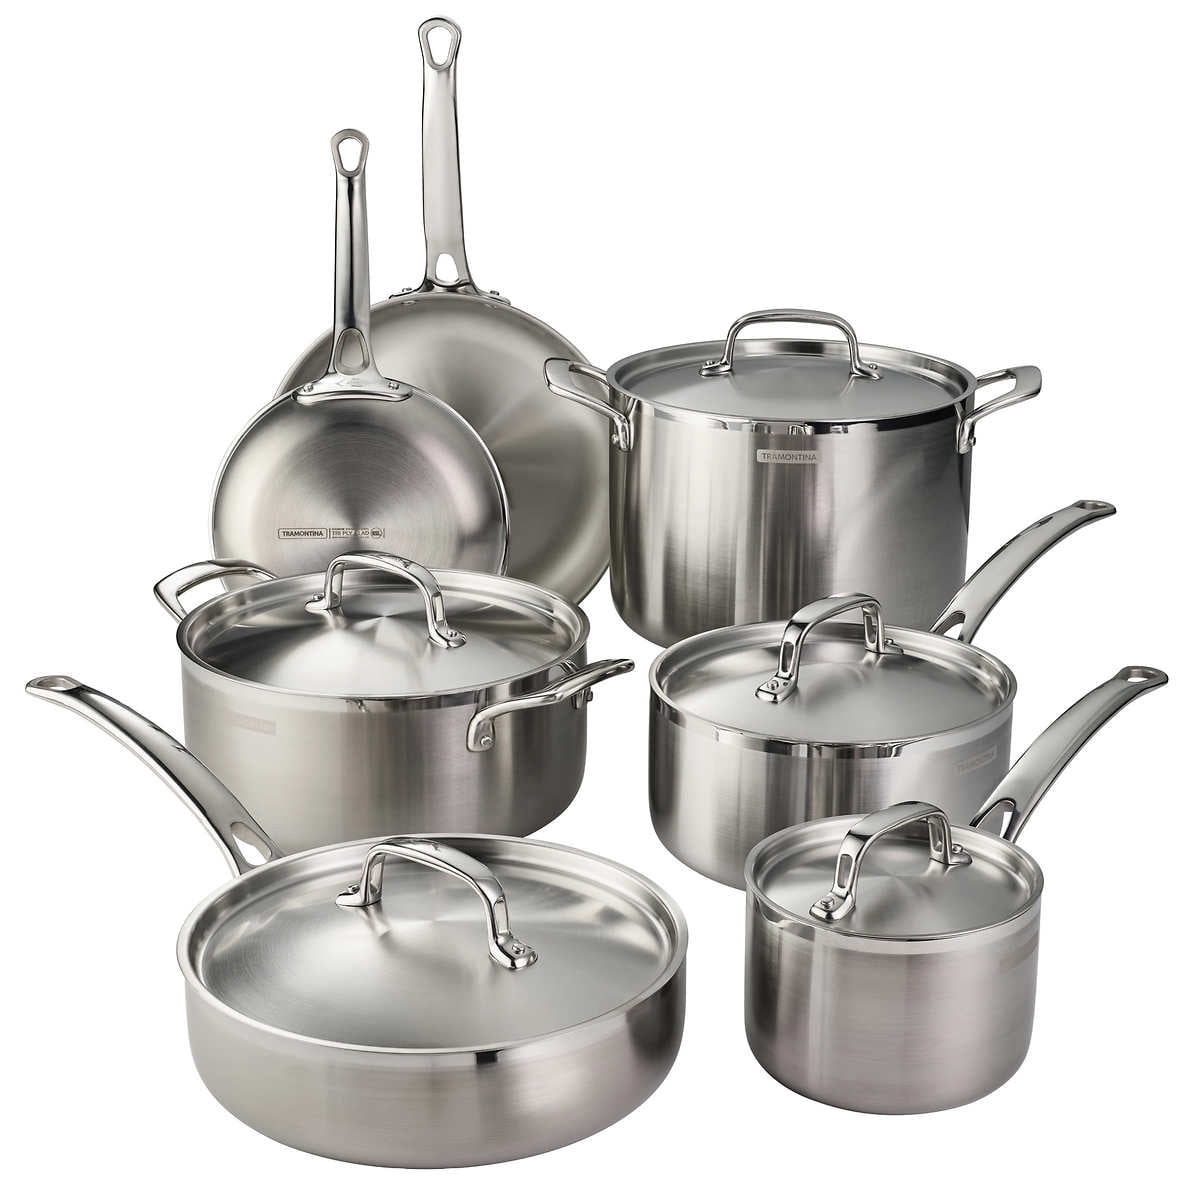 Deco Chef 12-Piece Stainless Steel Professional Cookware Set with Tri-Ply Base and Riveted Handles for Even and Consistent Cooking